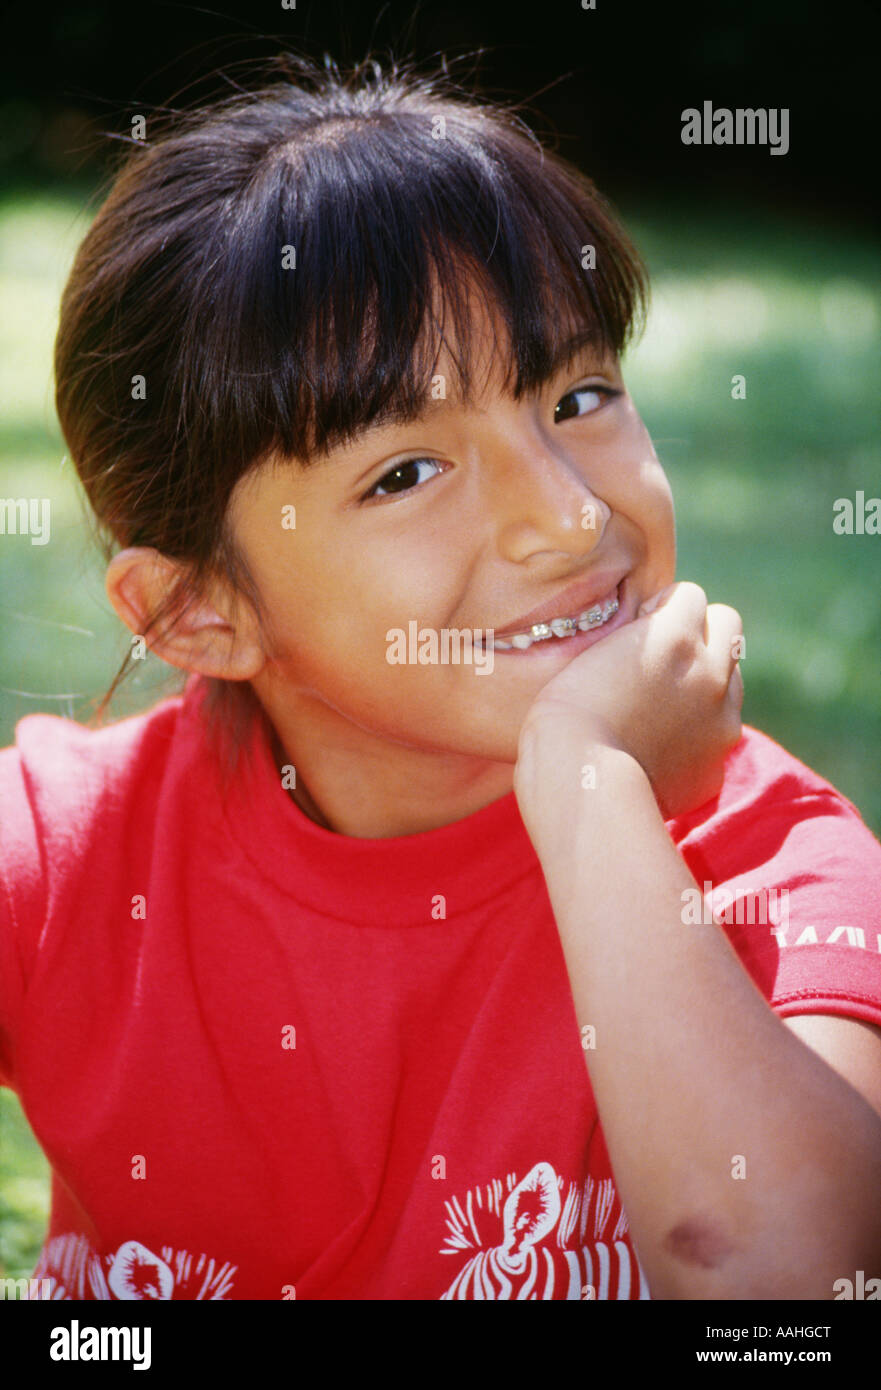 Happy Hispanic asian 7-9 year old smiling portrait wearing braces teeth closeup multicultural multi racial cultural biracial eye contact MR © Myrleen Pearson Stock Photo